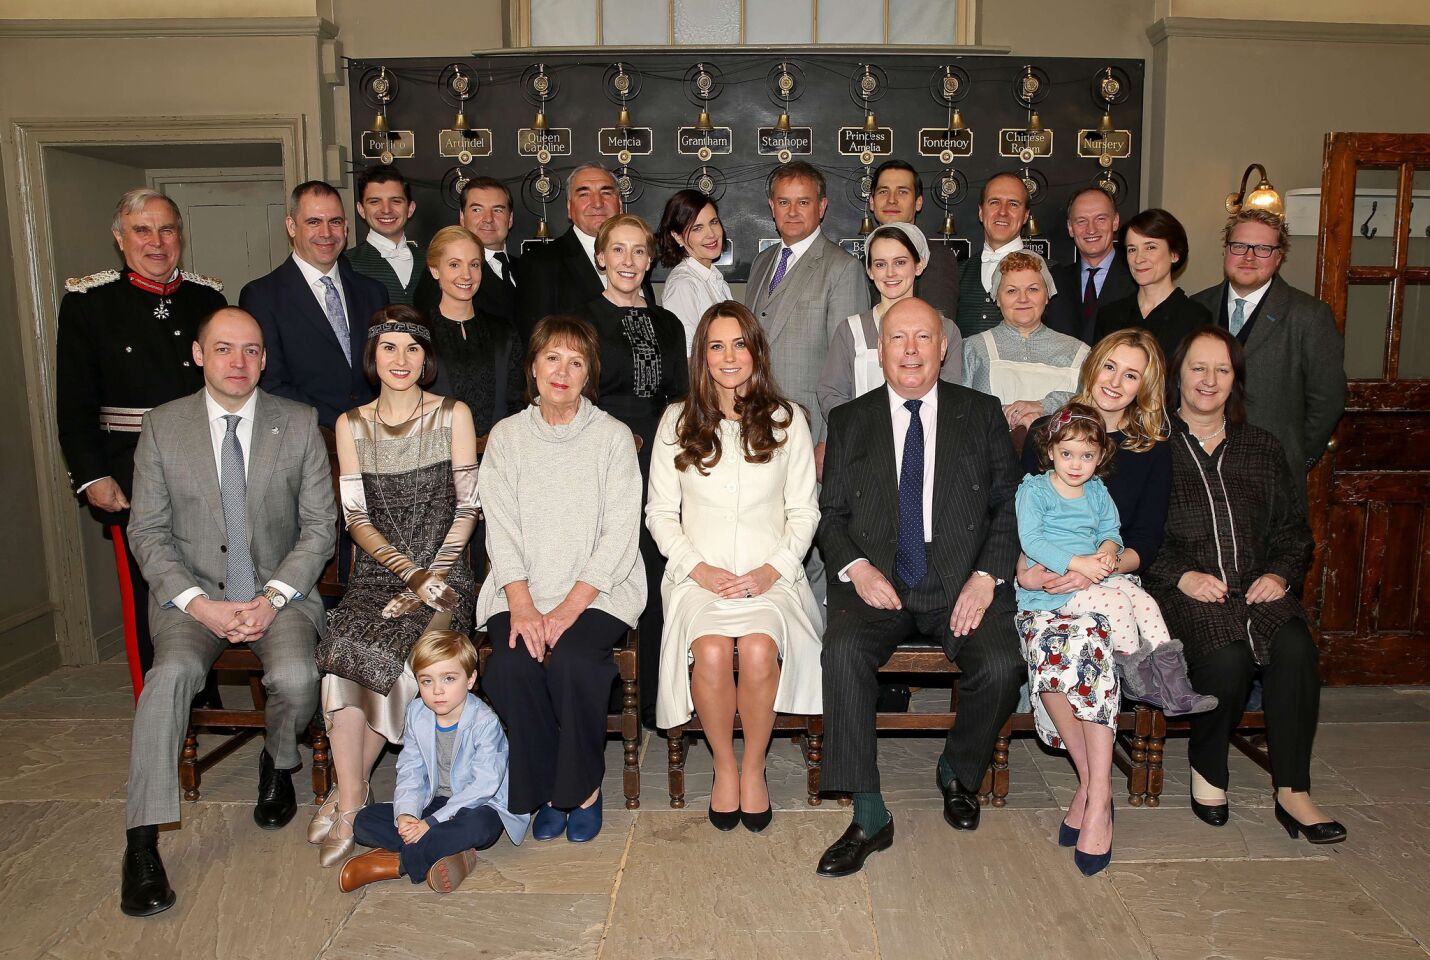 Britain's Catherine, Duchess of Cambridge (front, fifth from right), poses with the cast, crew and producers of British television series "Downton Abbey" during an official visit to the set at Ealing Studios in west London on March 12, 2015.